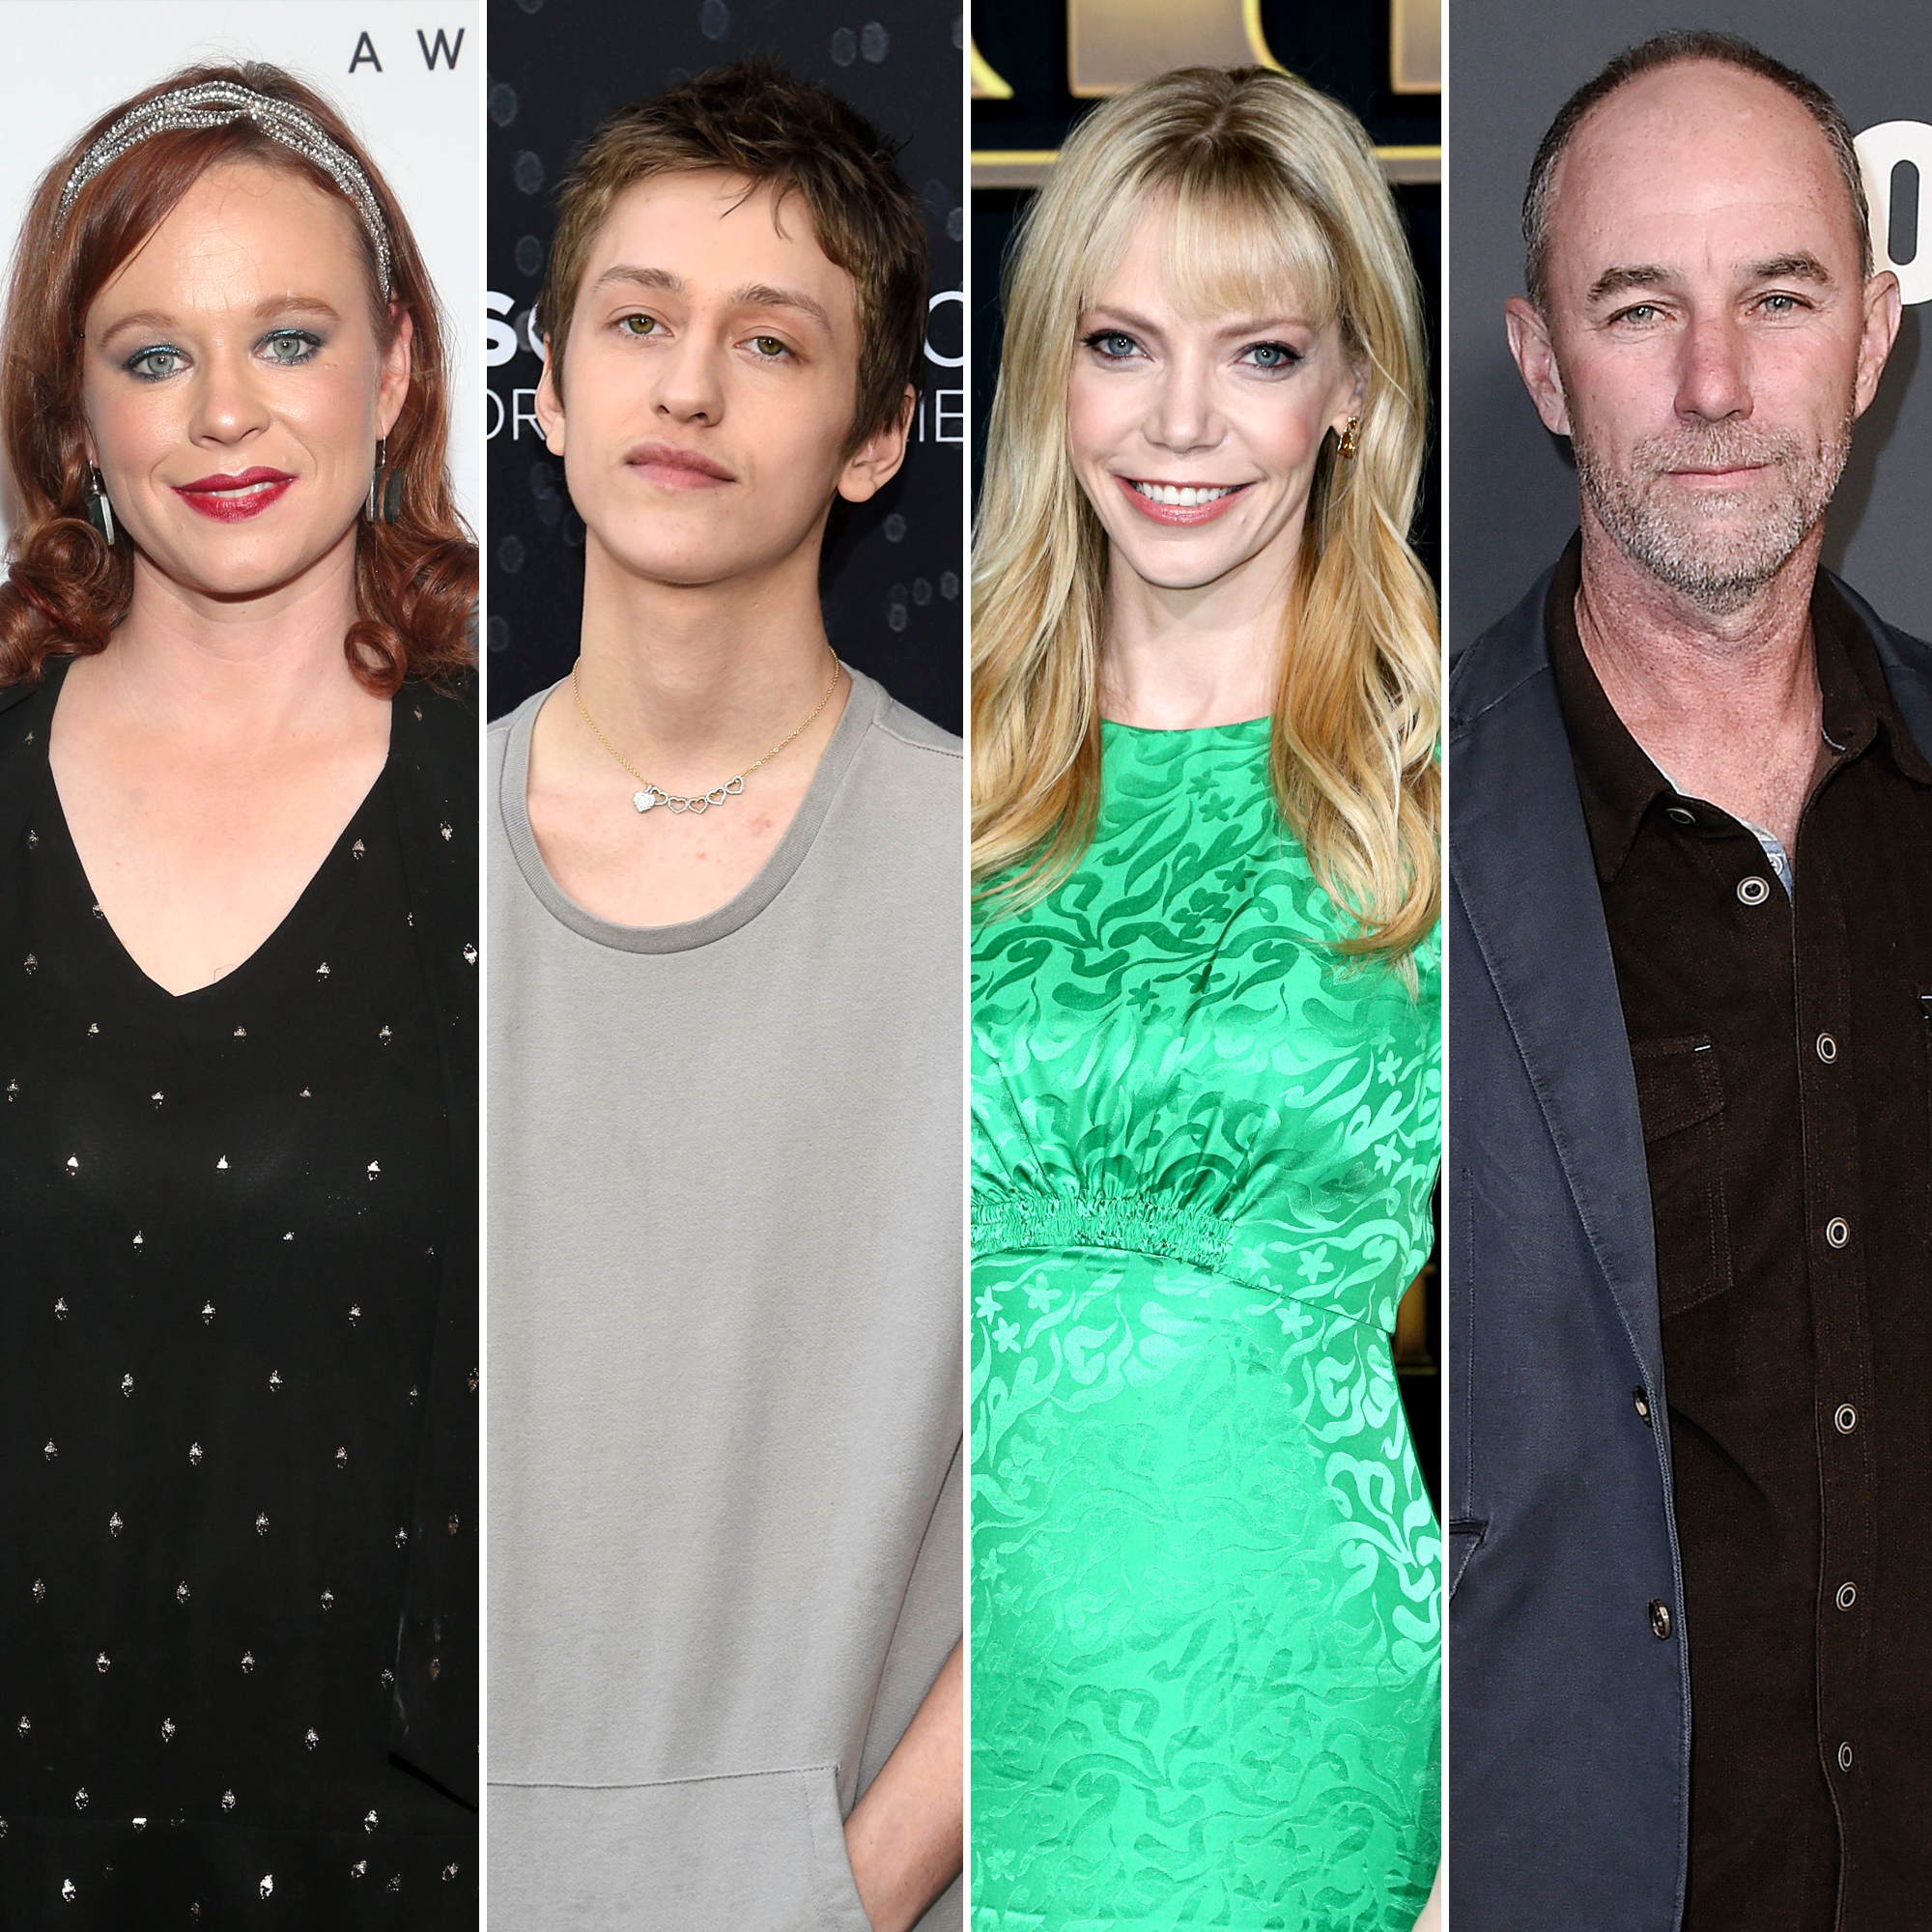 Netflix's 'Wednesday': Every Actor Cast in the Series So Far